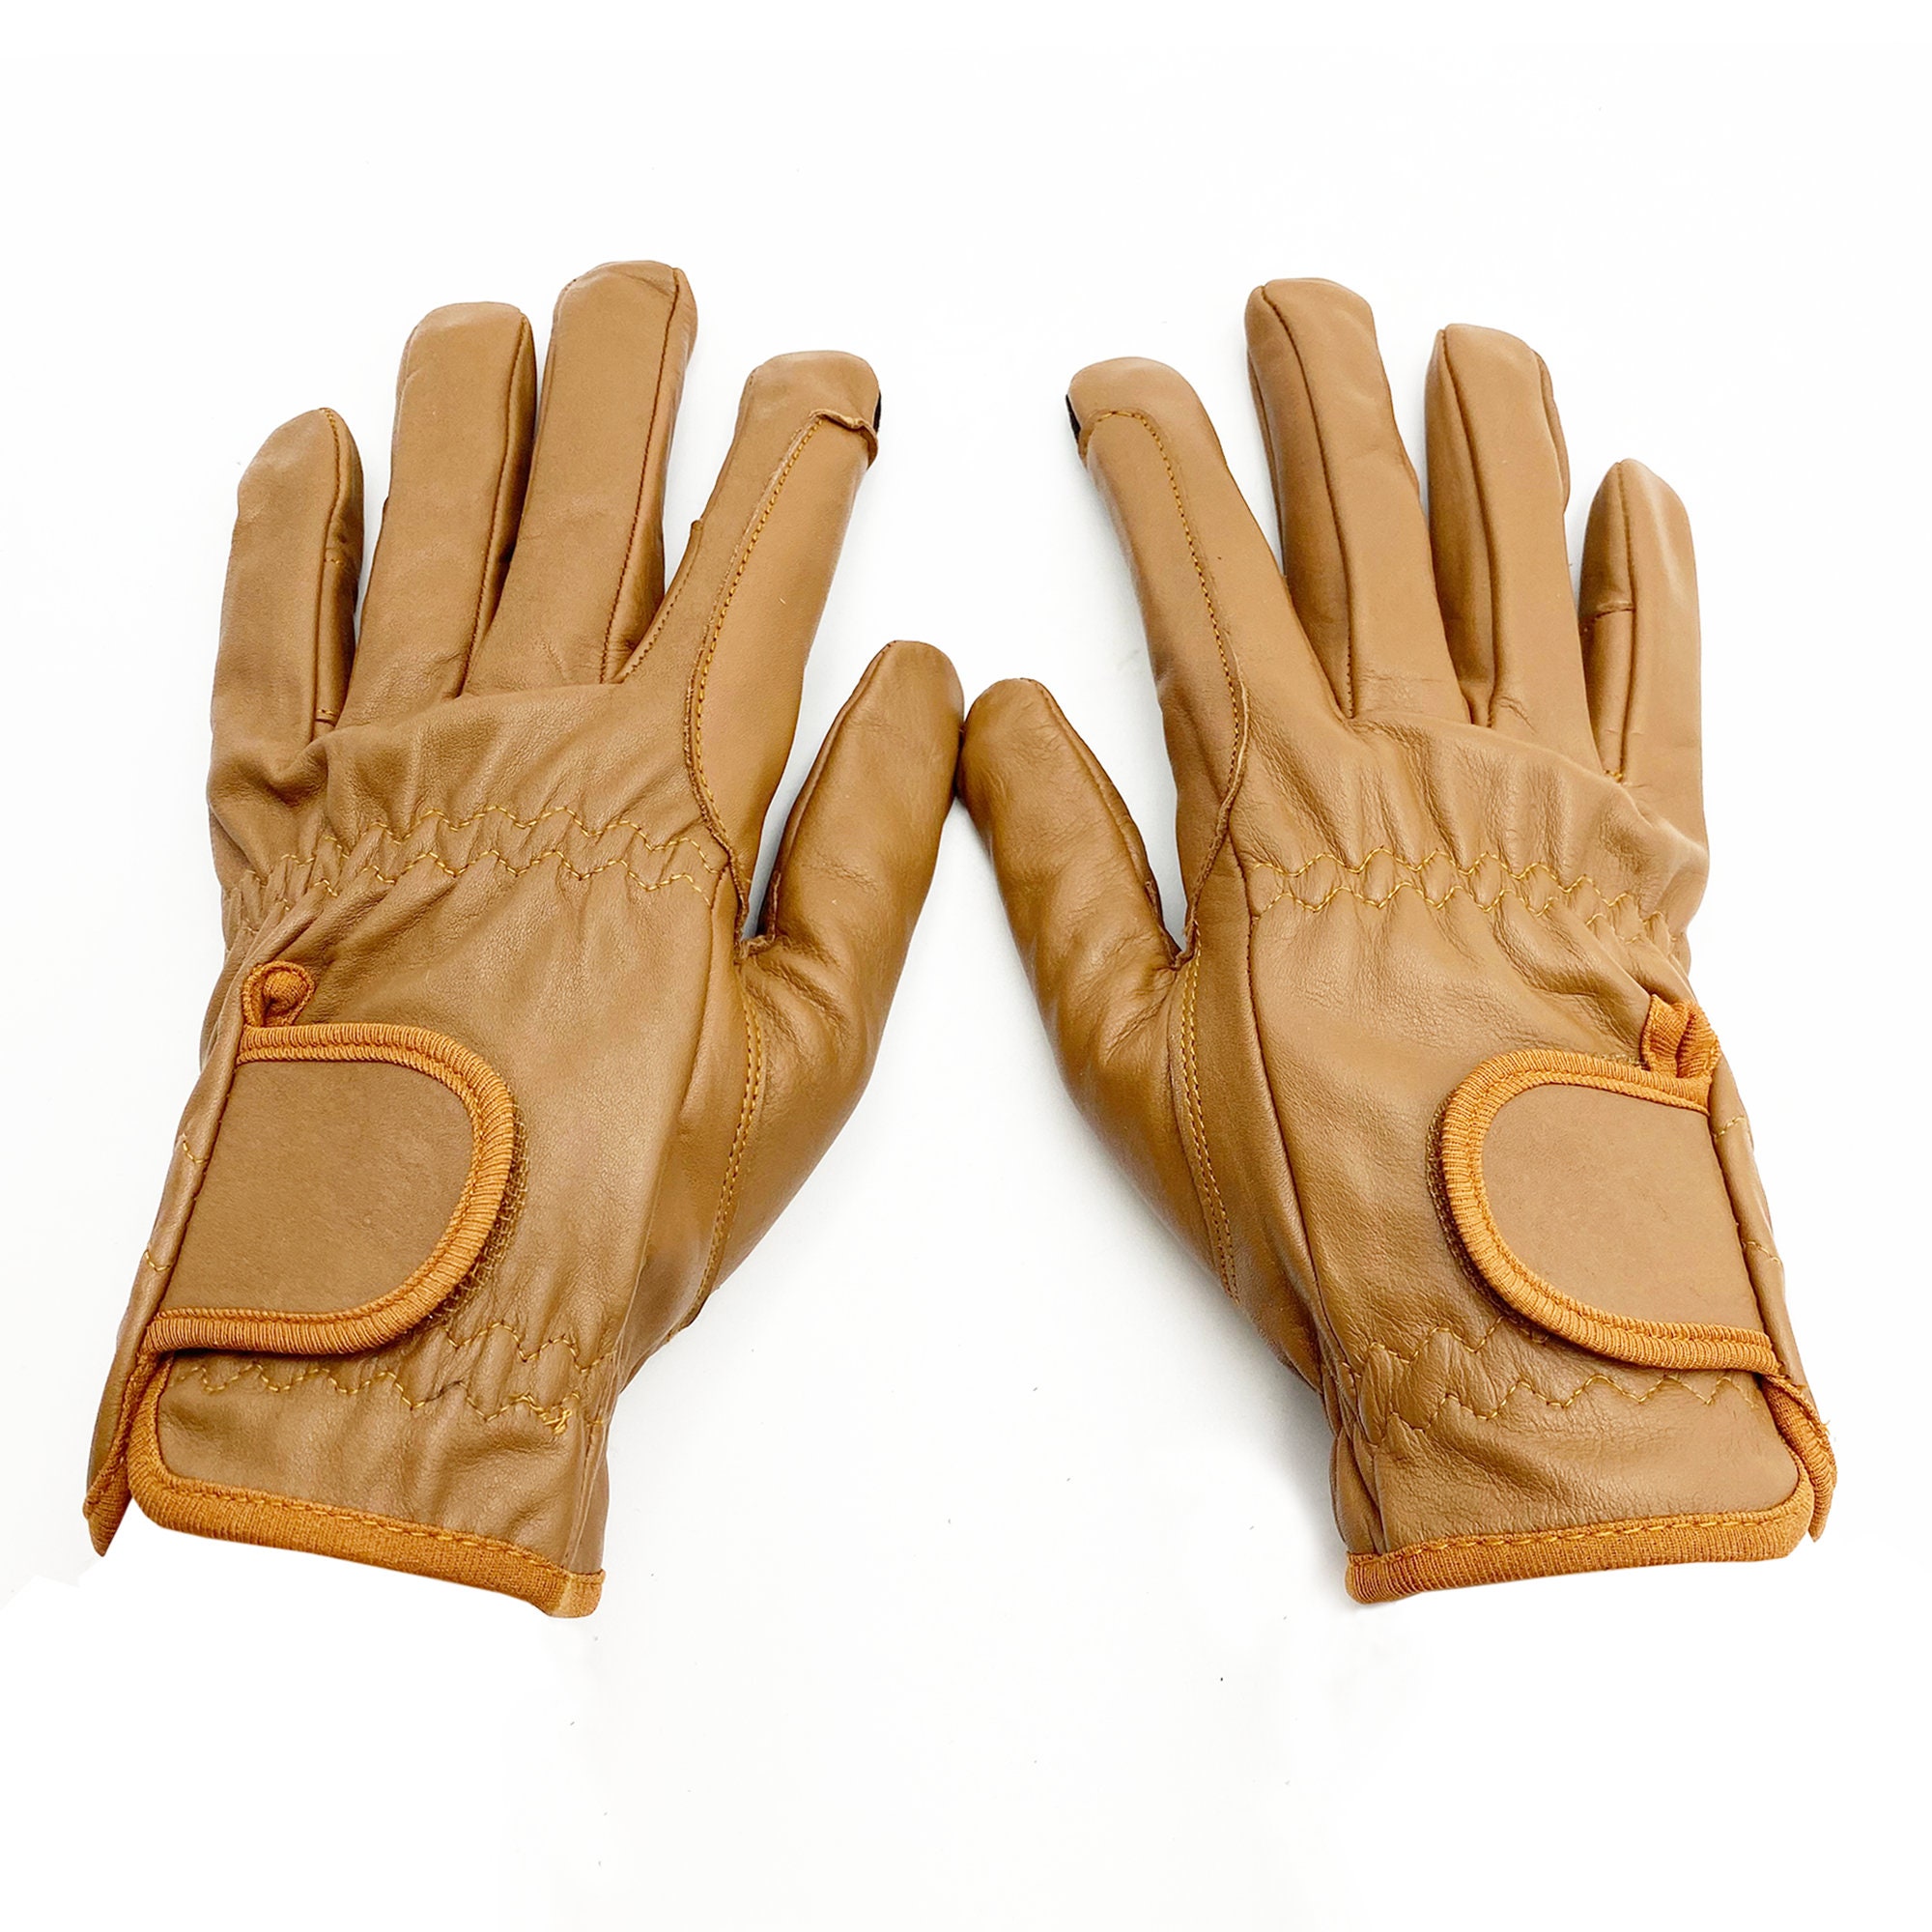 Men Police Search Driving Gloves Great Dexterity Strong Grip Thin Leather  Fit